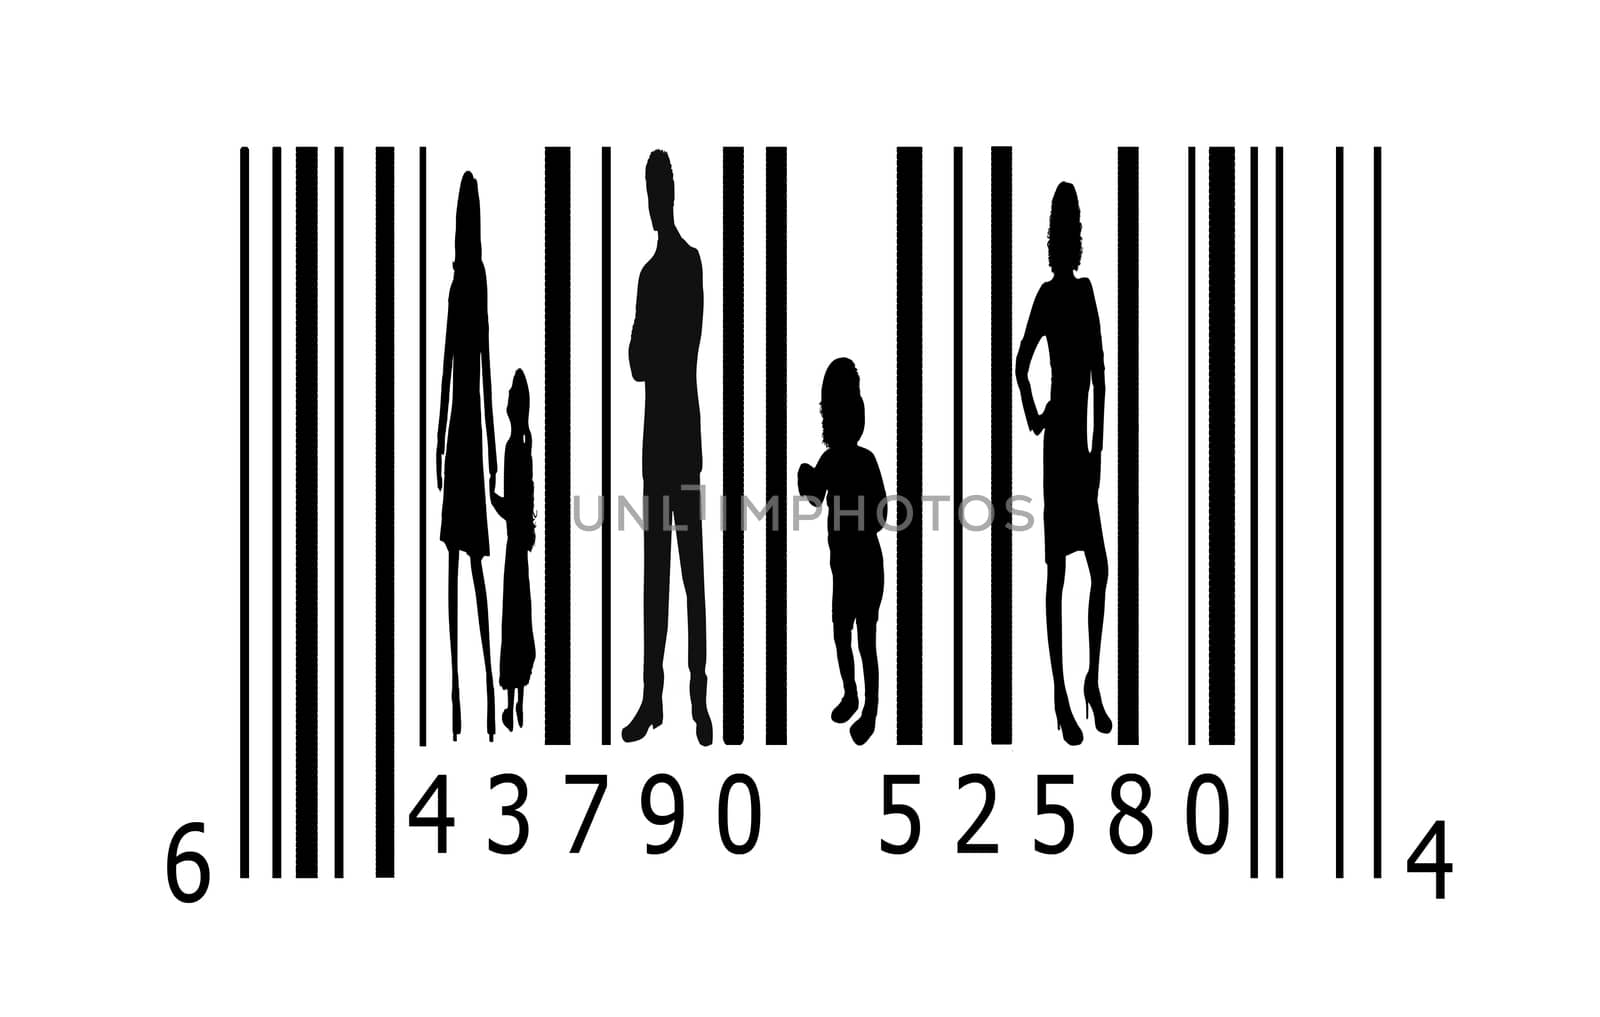 Bar code and people silhouettes by svanhorn